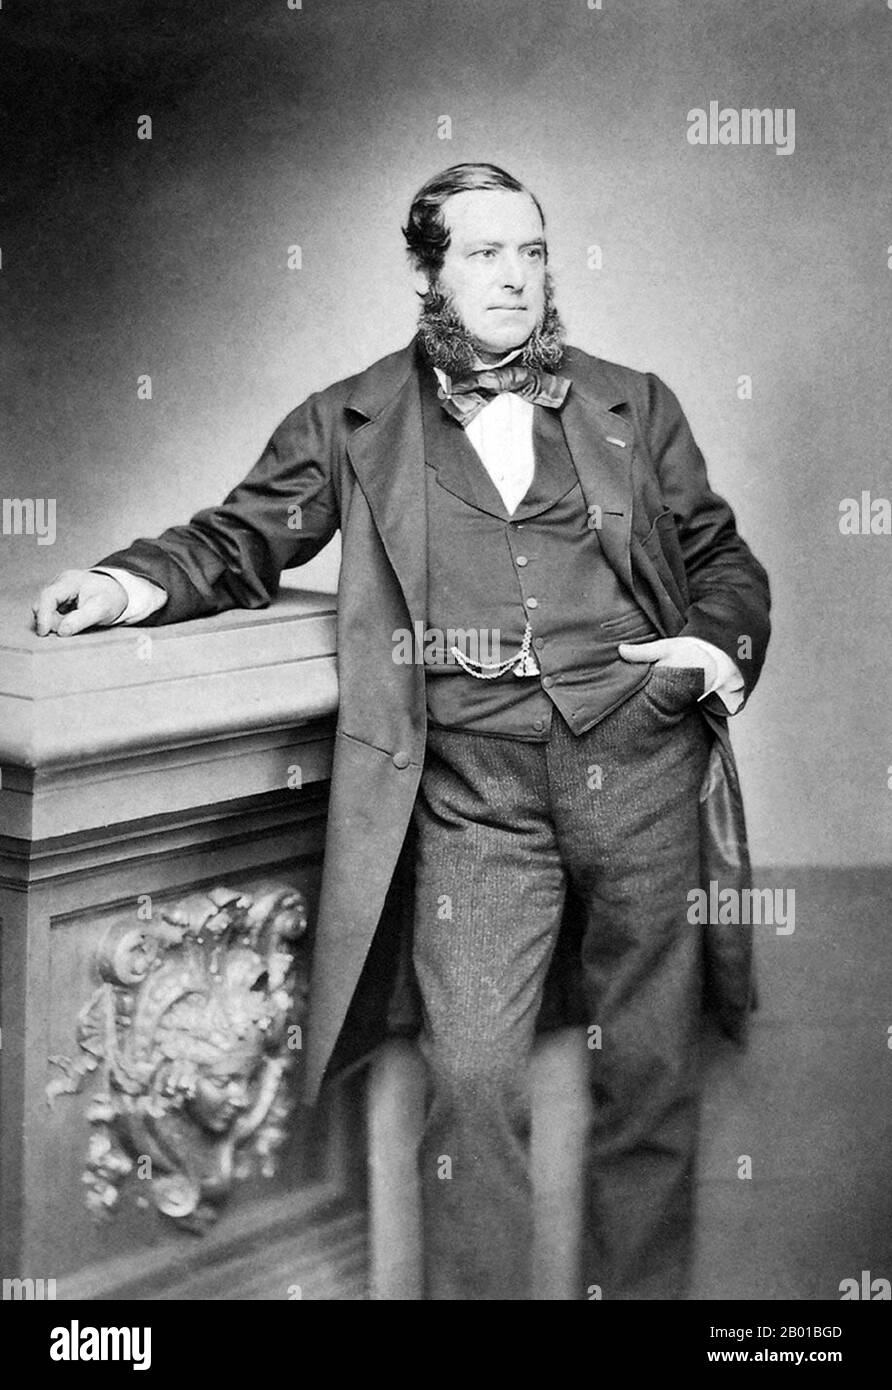 France/Vietnam: Henri Laurent Rivière (1827-1883), French naval officer, writer and imperialist. Photograph by Antoine Samuel Adam-Salomon (9 January 1818 - 29 April 1881), c. 1859.  Henri Laurent Rivière was a French naval officer and writer, chiefly remembered today for his role in advancing the French conquest of Tonkin (northern Vietnam) in the 1880s. Rivière's seizure of the citadel of Hanoi in April 1882 inaugurated a period of undeclared hostilities between France and China that culminated two years later in the Sino-French War (1884-1885). Stock Photo